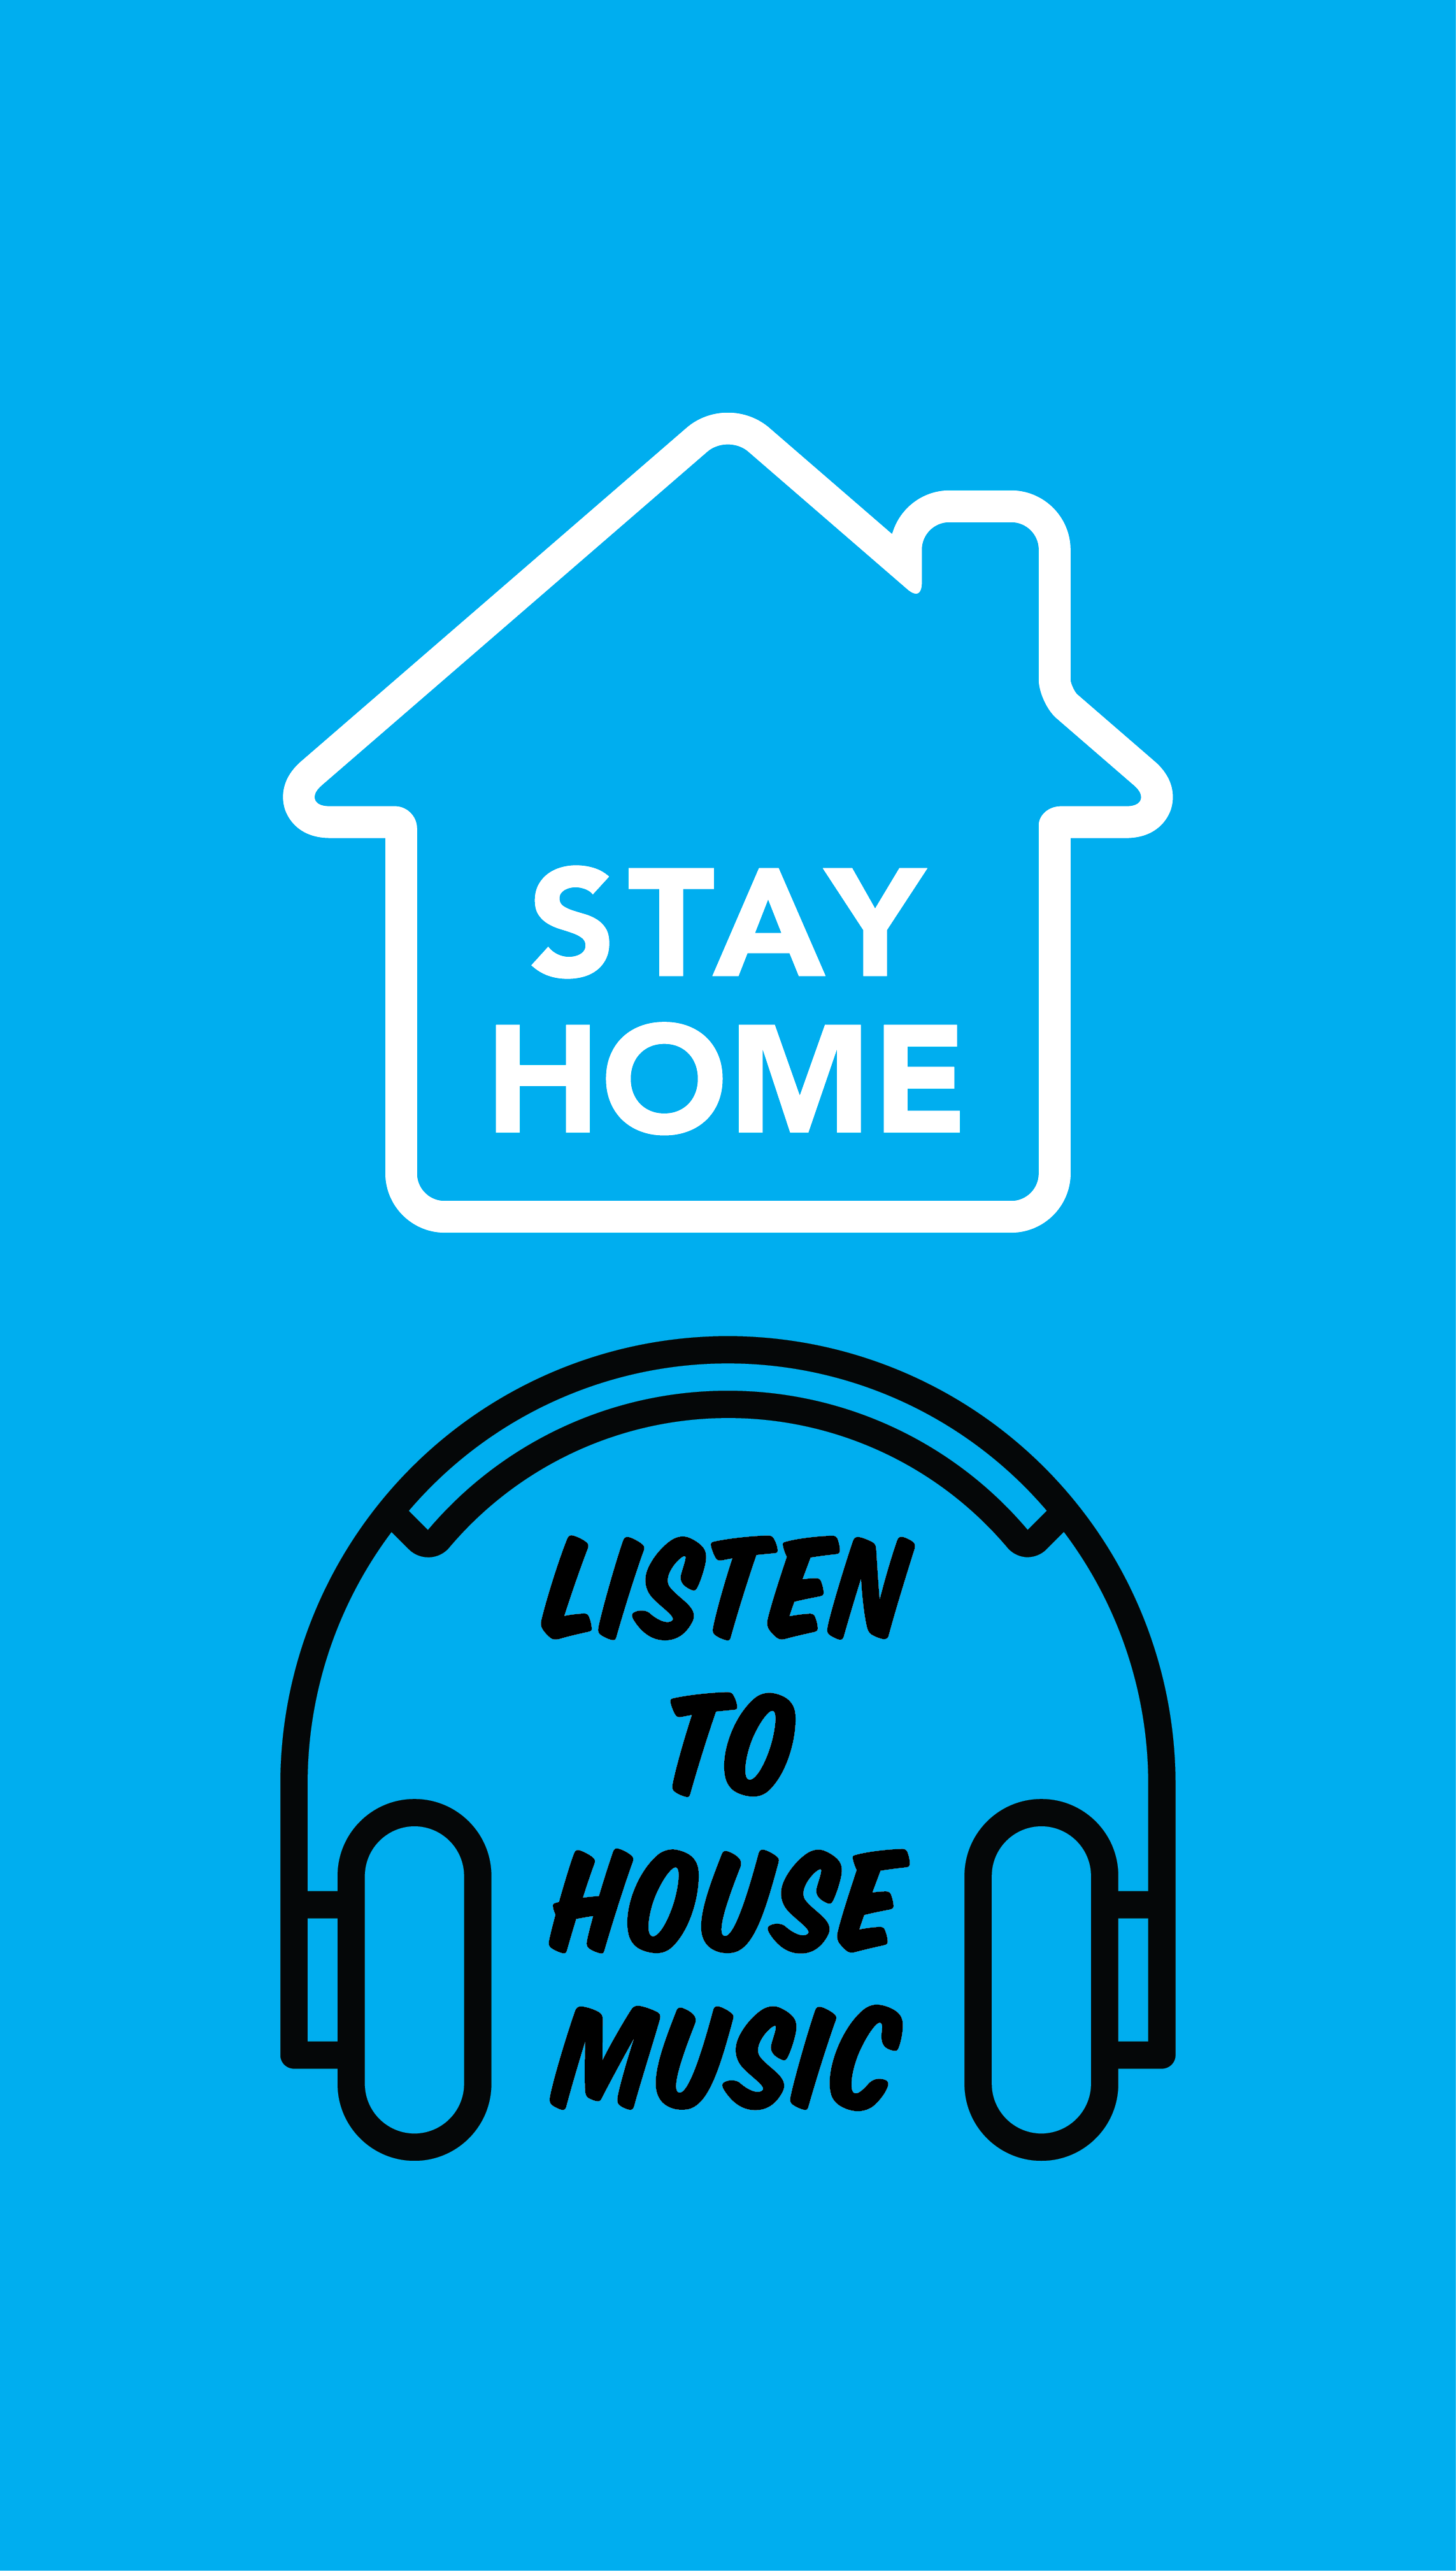 tay home, listen to house music